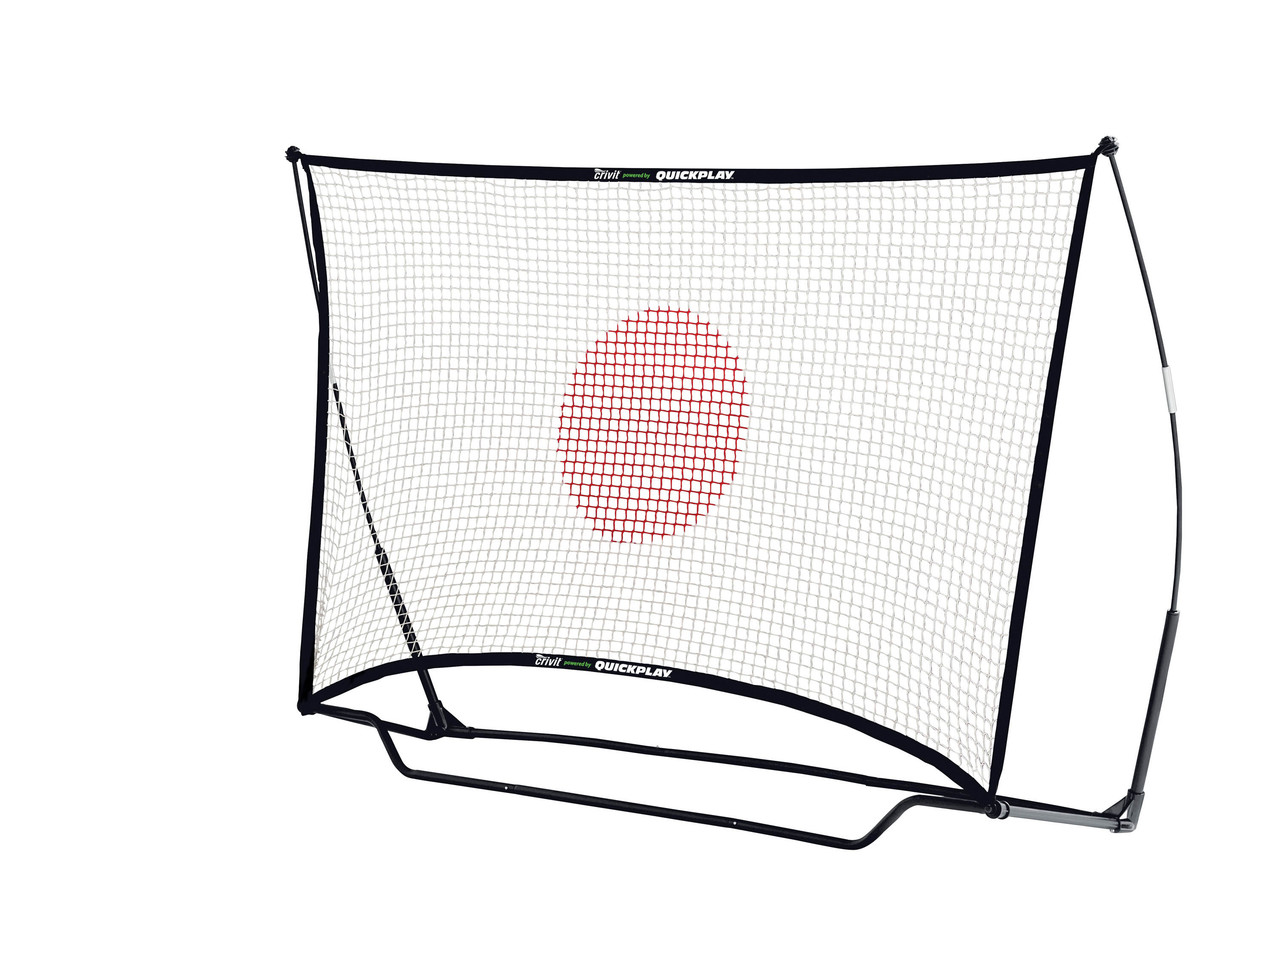 CRIVIT 2-in-1: Portable Pop-Up Goal with Rebound Net